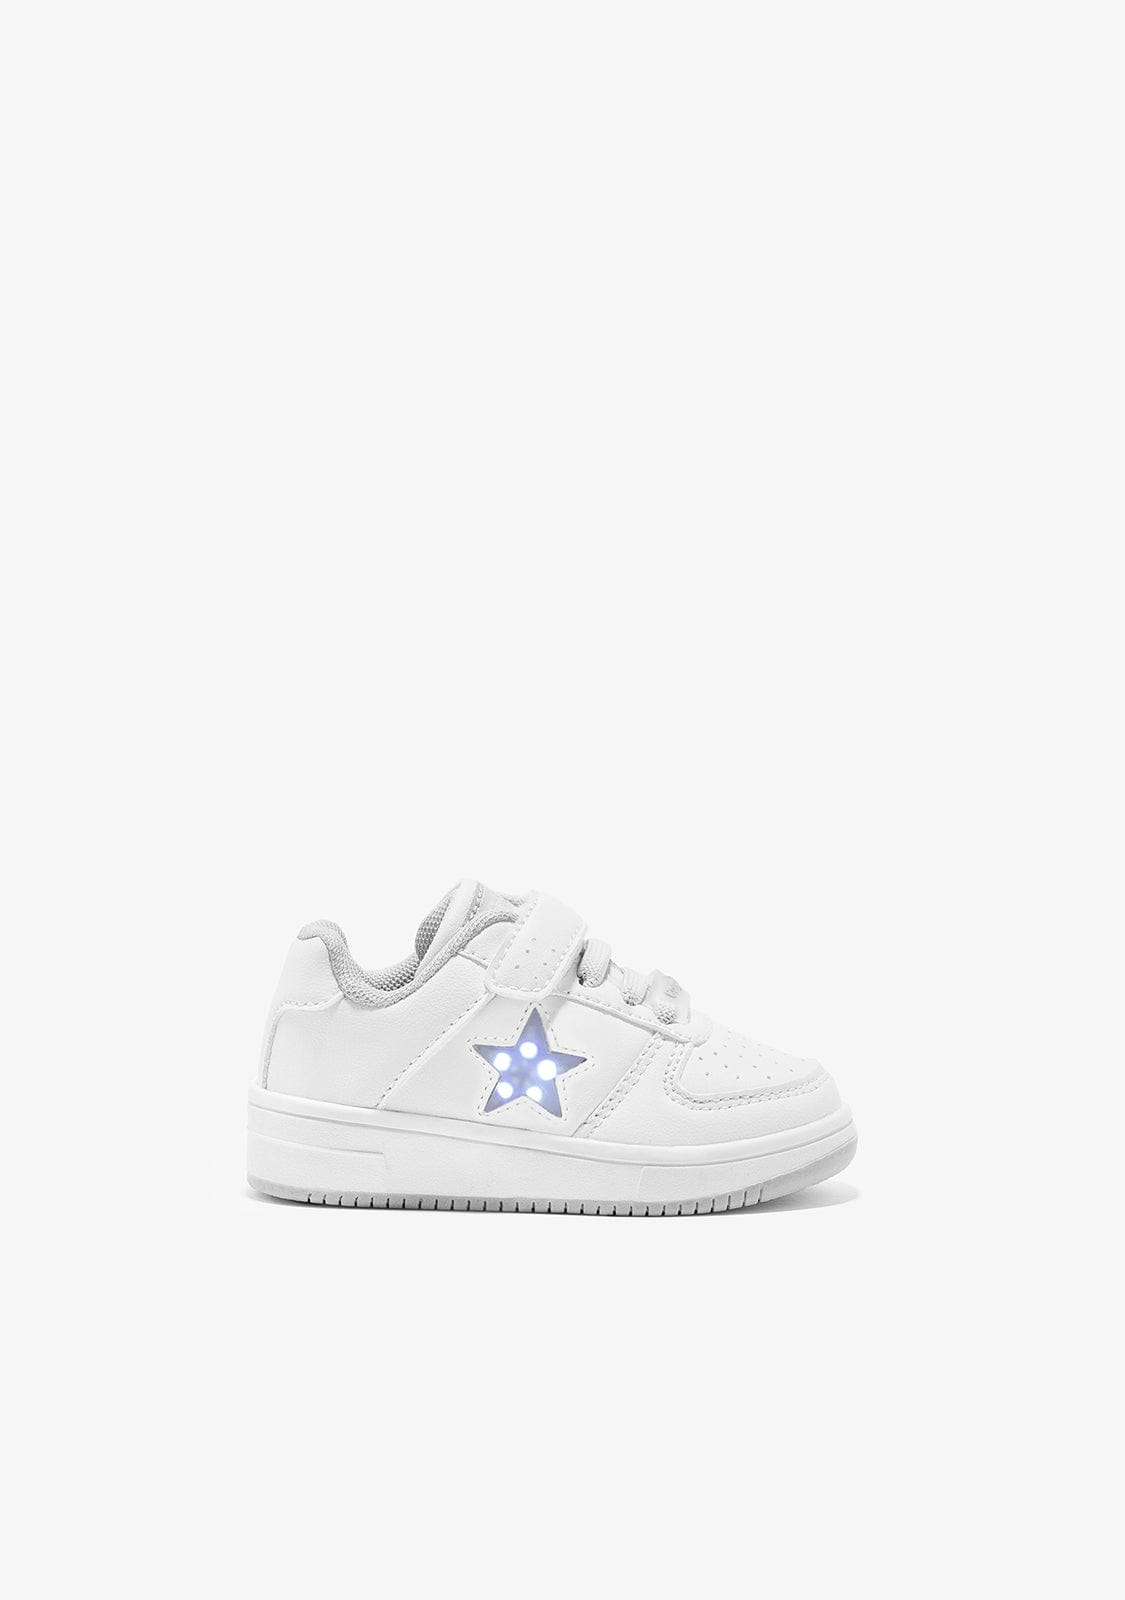 OSITO Shoes Baby's White Star With Lights Sneakers